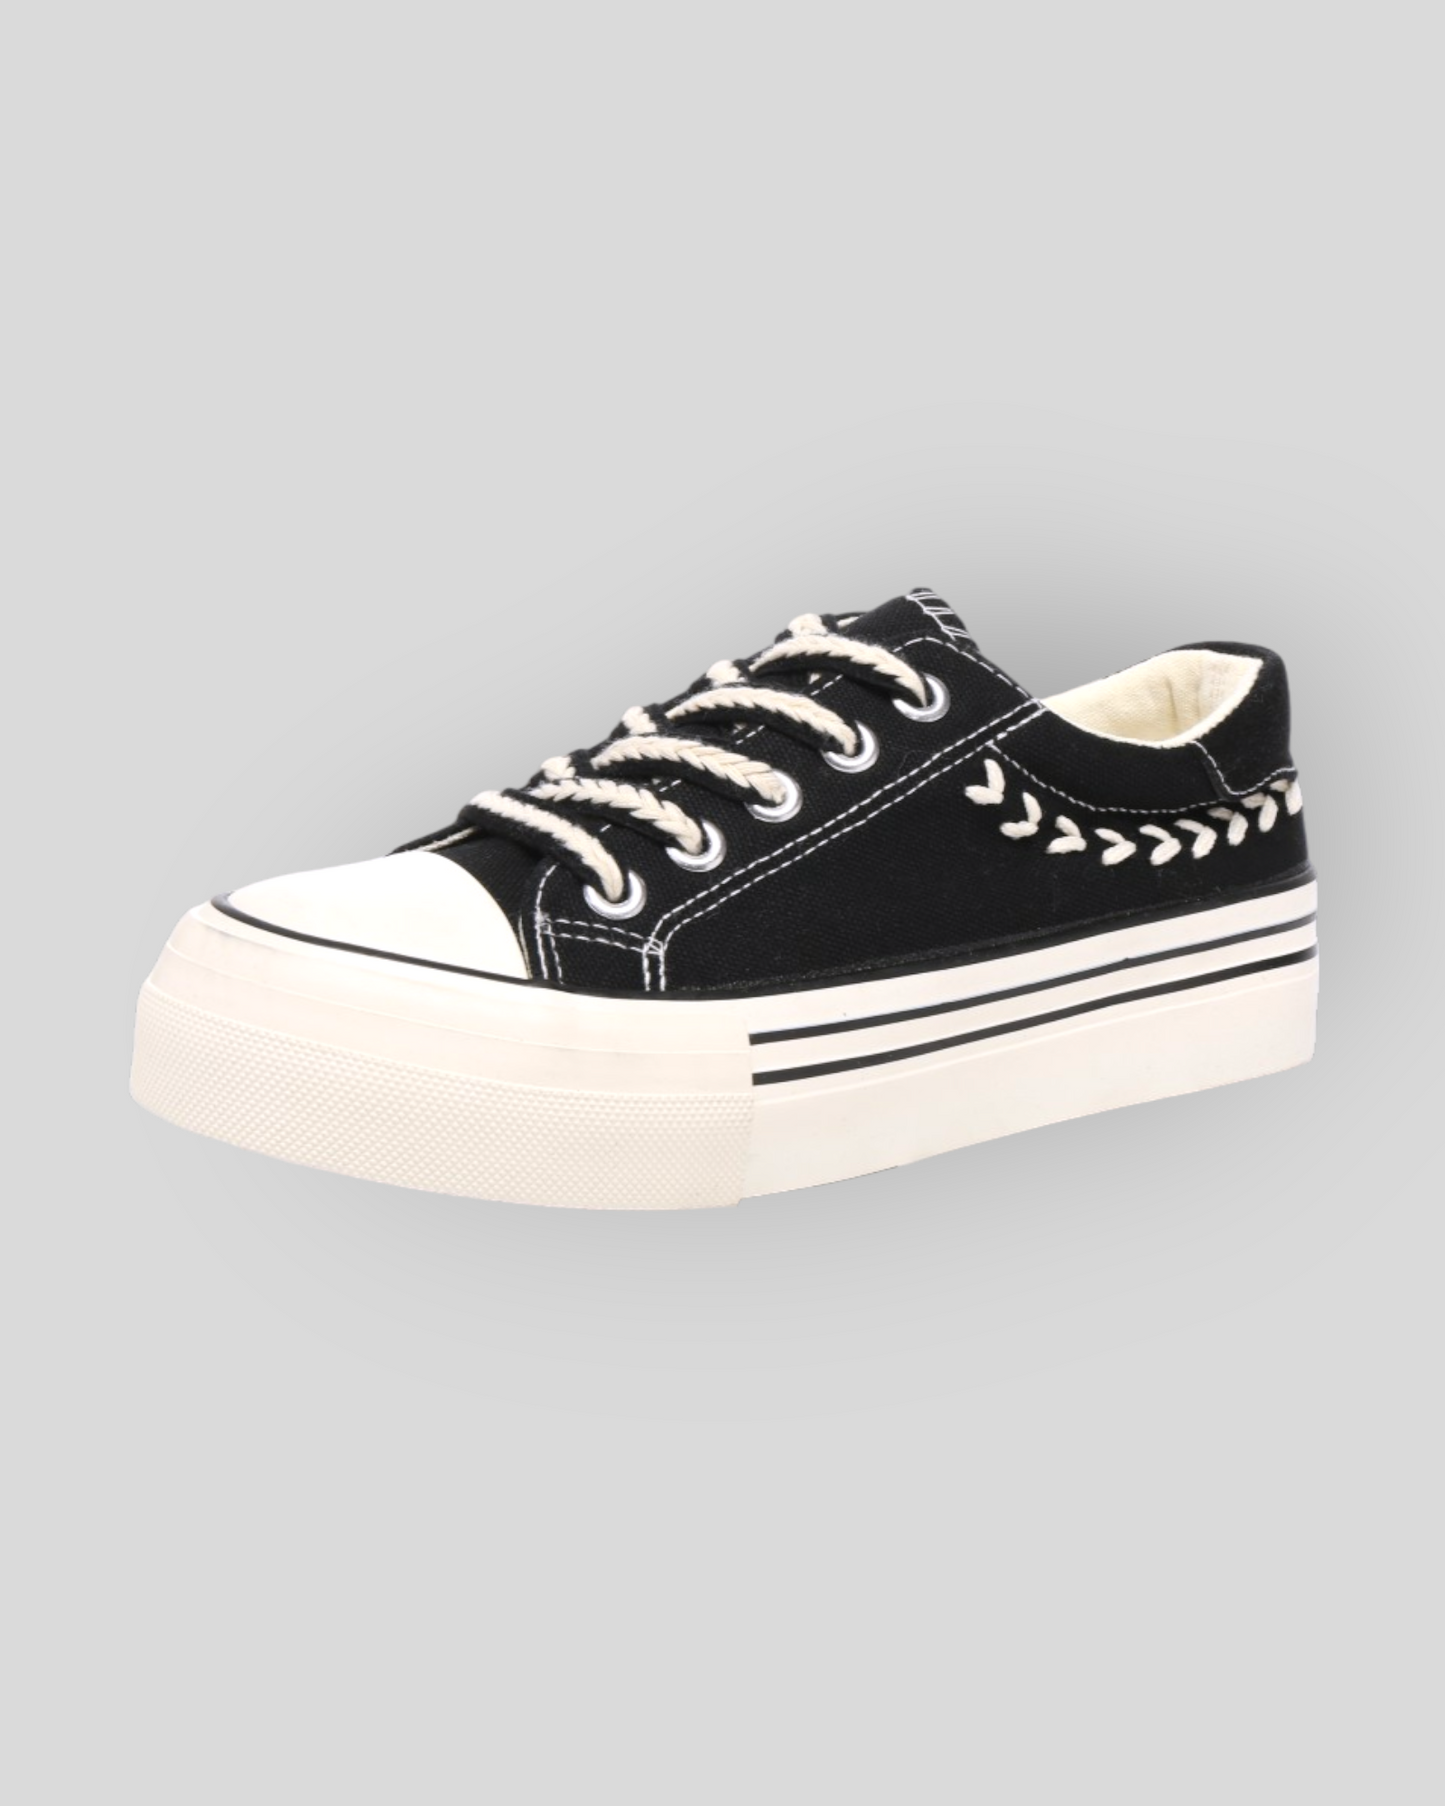 Women's Outdoor Black Canvas Sneakers/ Trainers/ Shoes